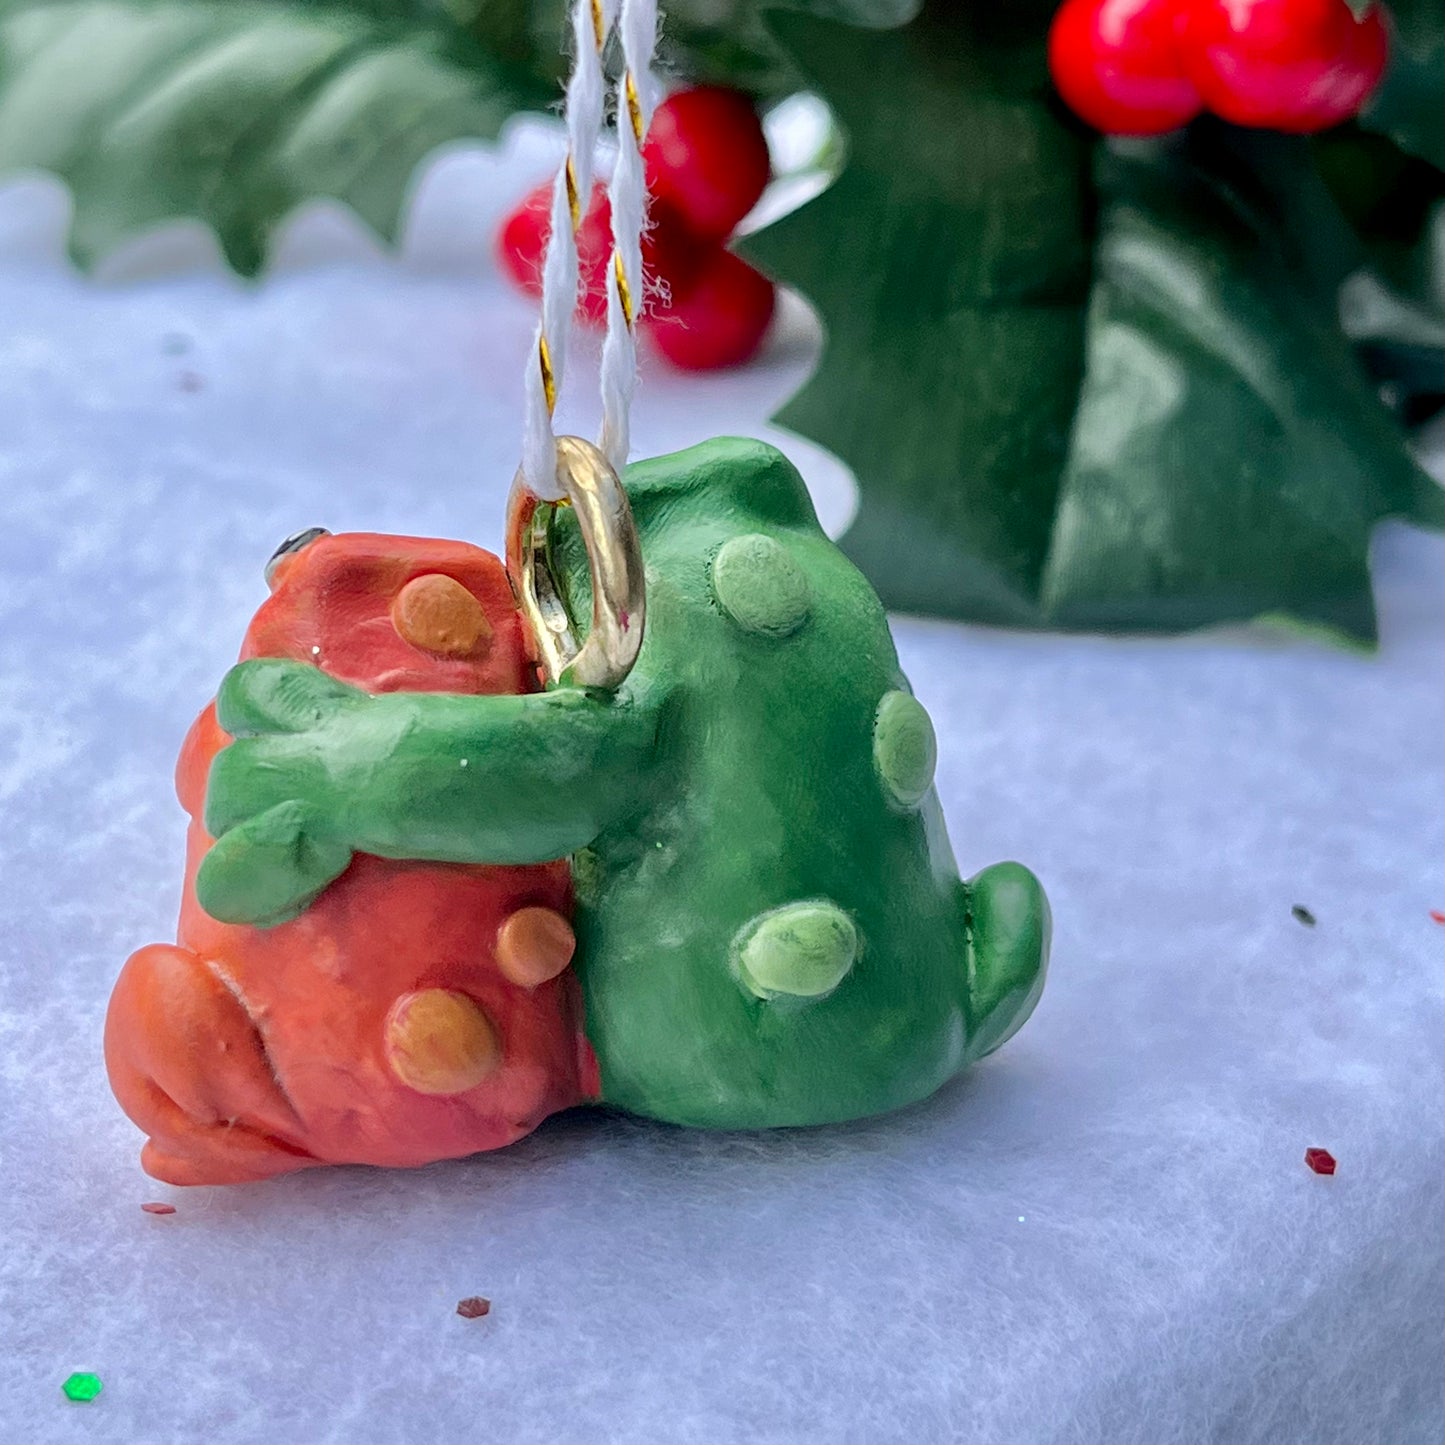 Handmade Polymer Clay Frog and Toad Figurine Ornament